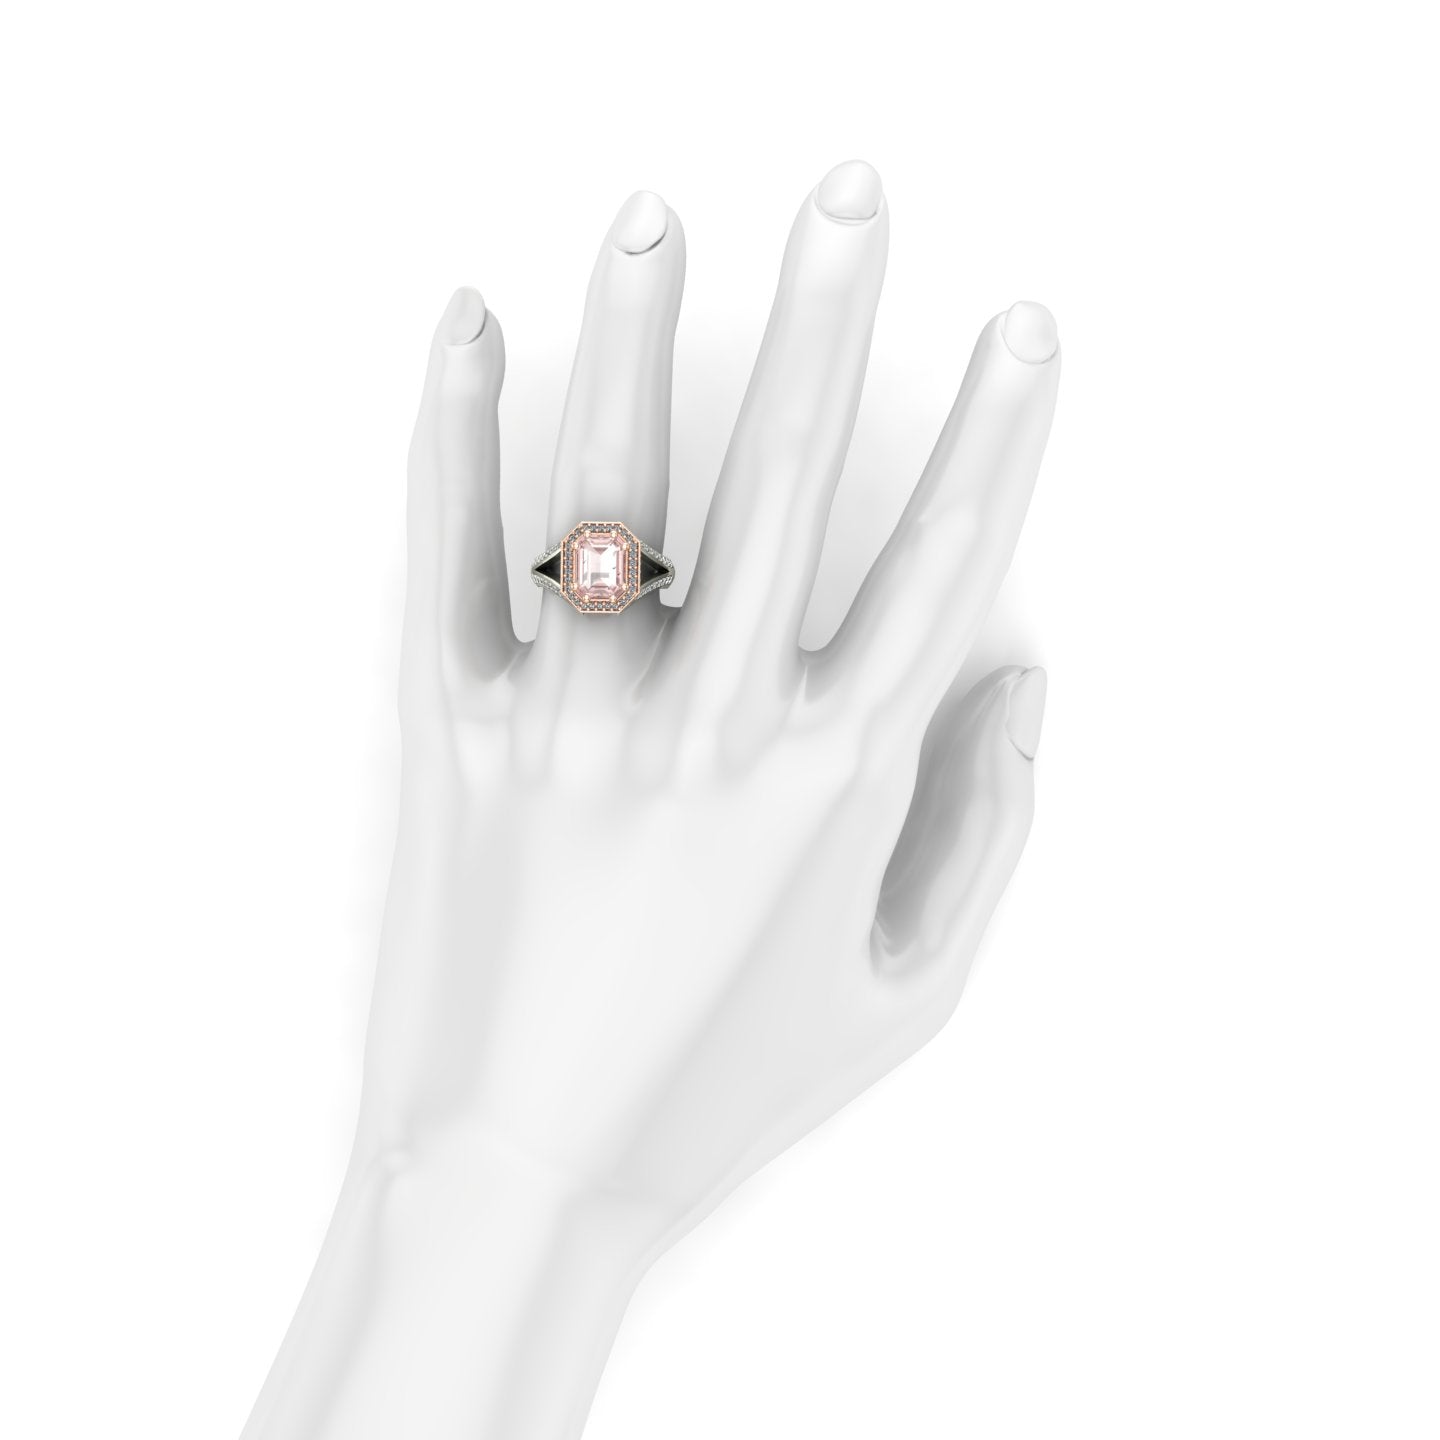 emerald cut morganite and diamond two tone split shank ring in 14k rose and white gold - Charles Babb Designs - on hand